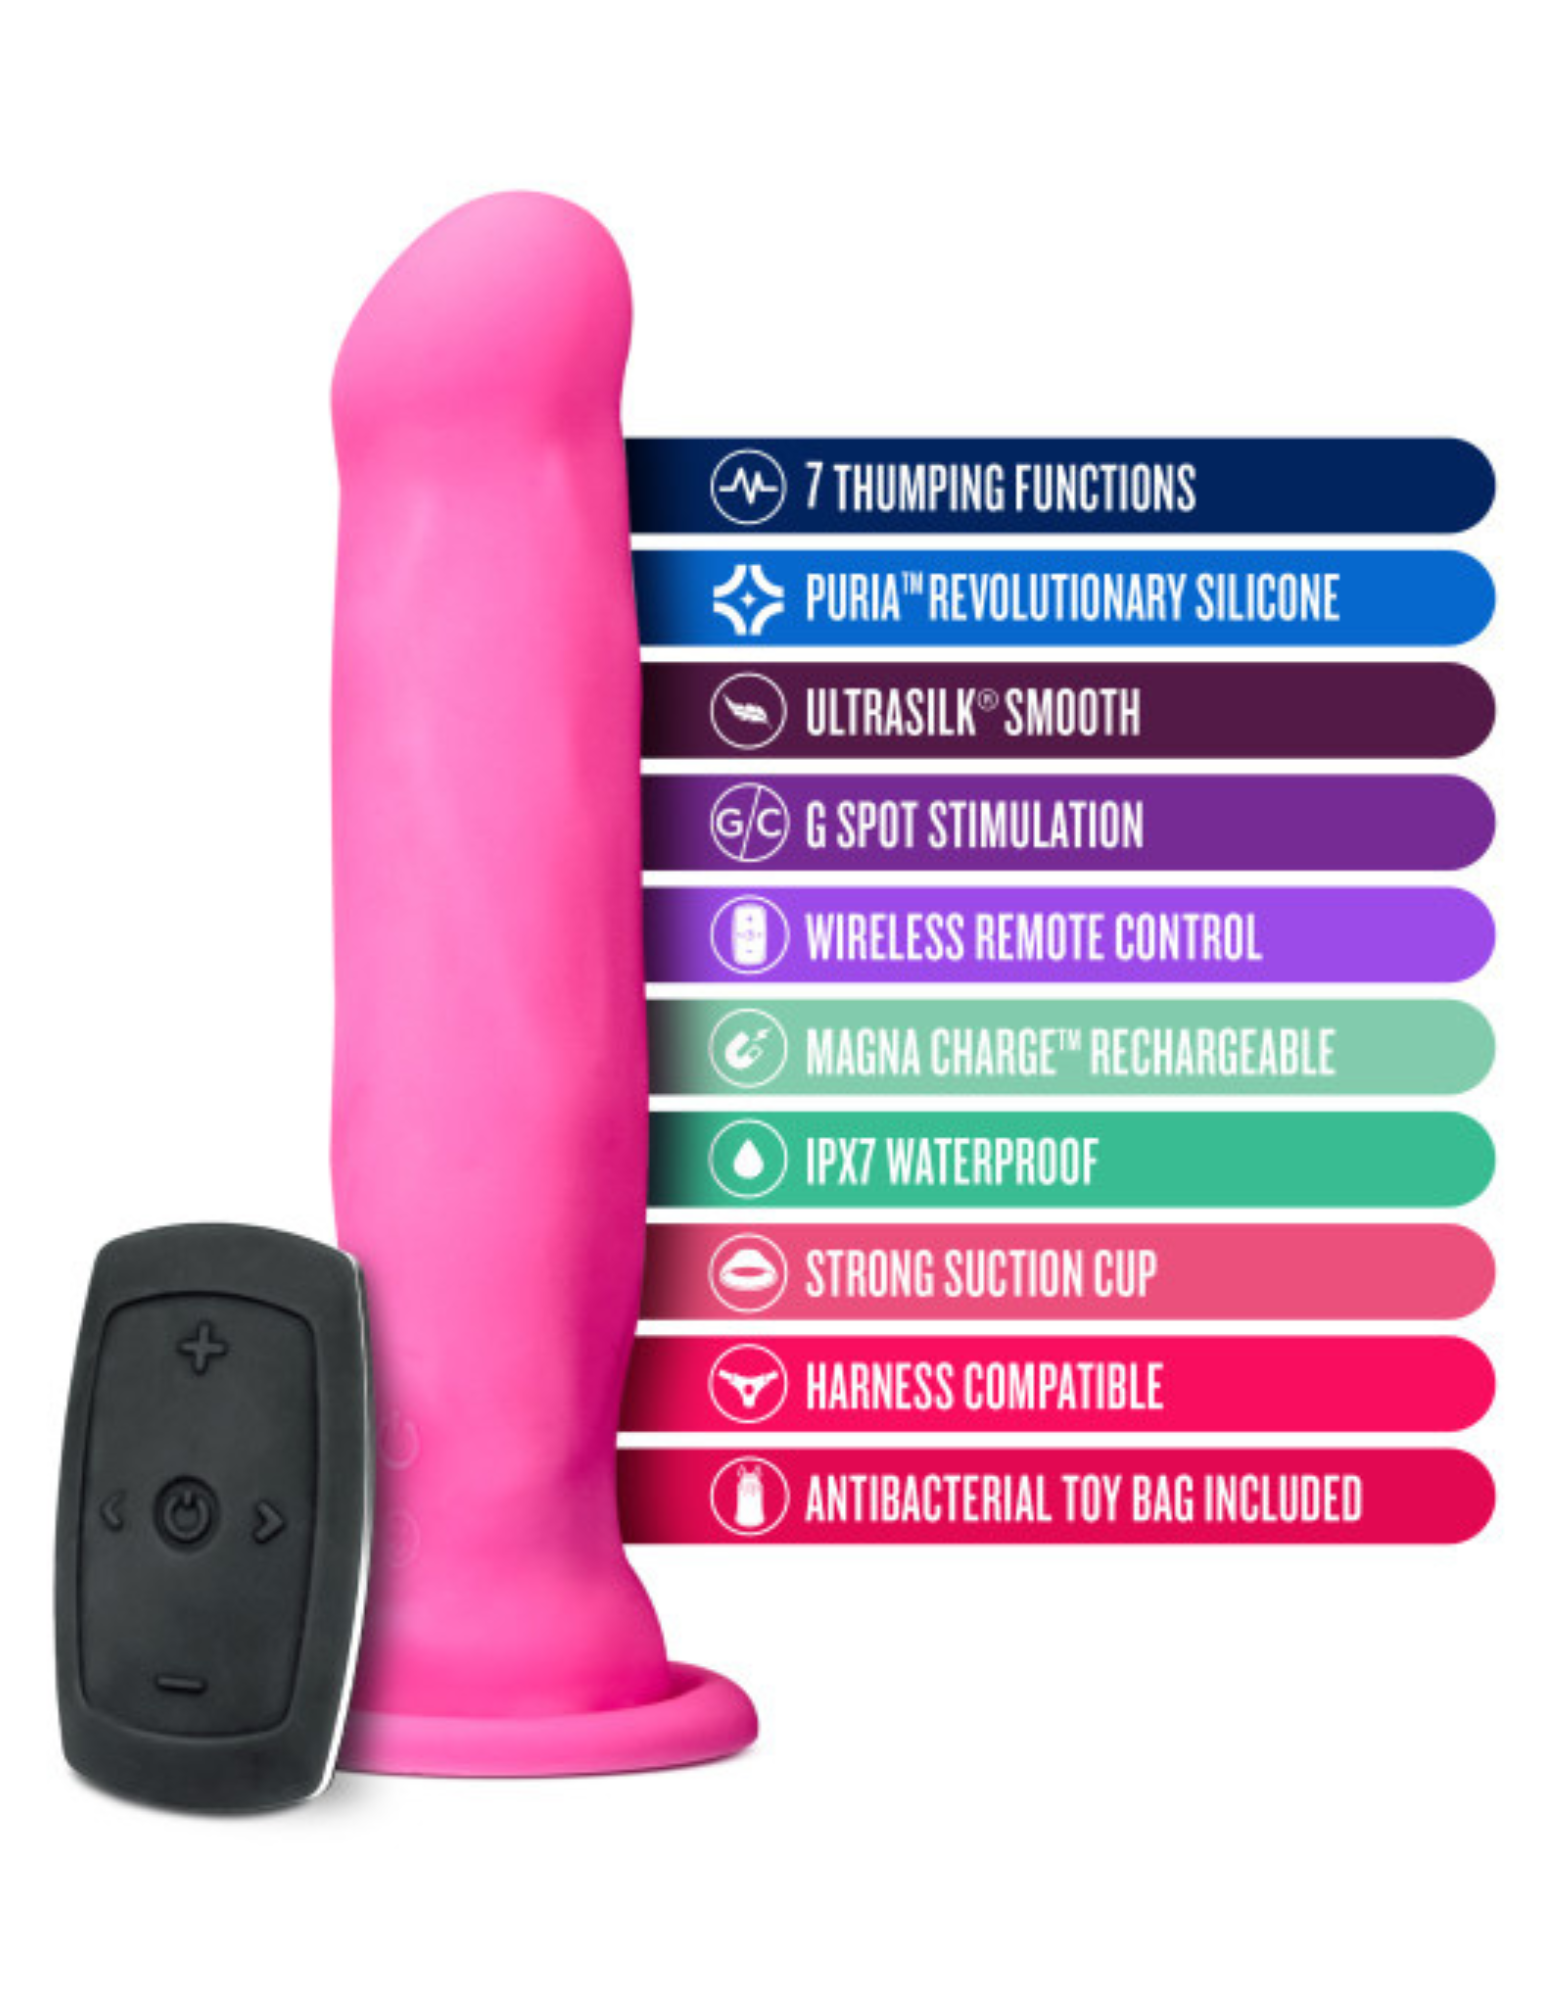 Image shows the Havana Impressions Vibrator from Blush (pink) with its remote and lists its features as noted on the description page.